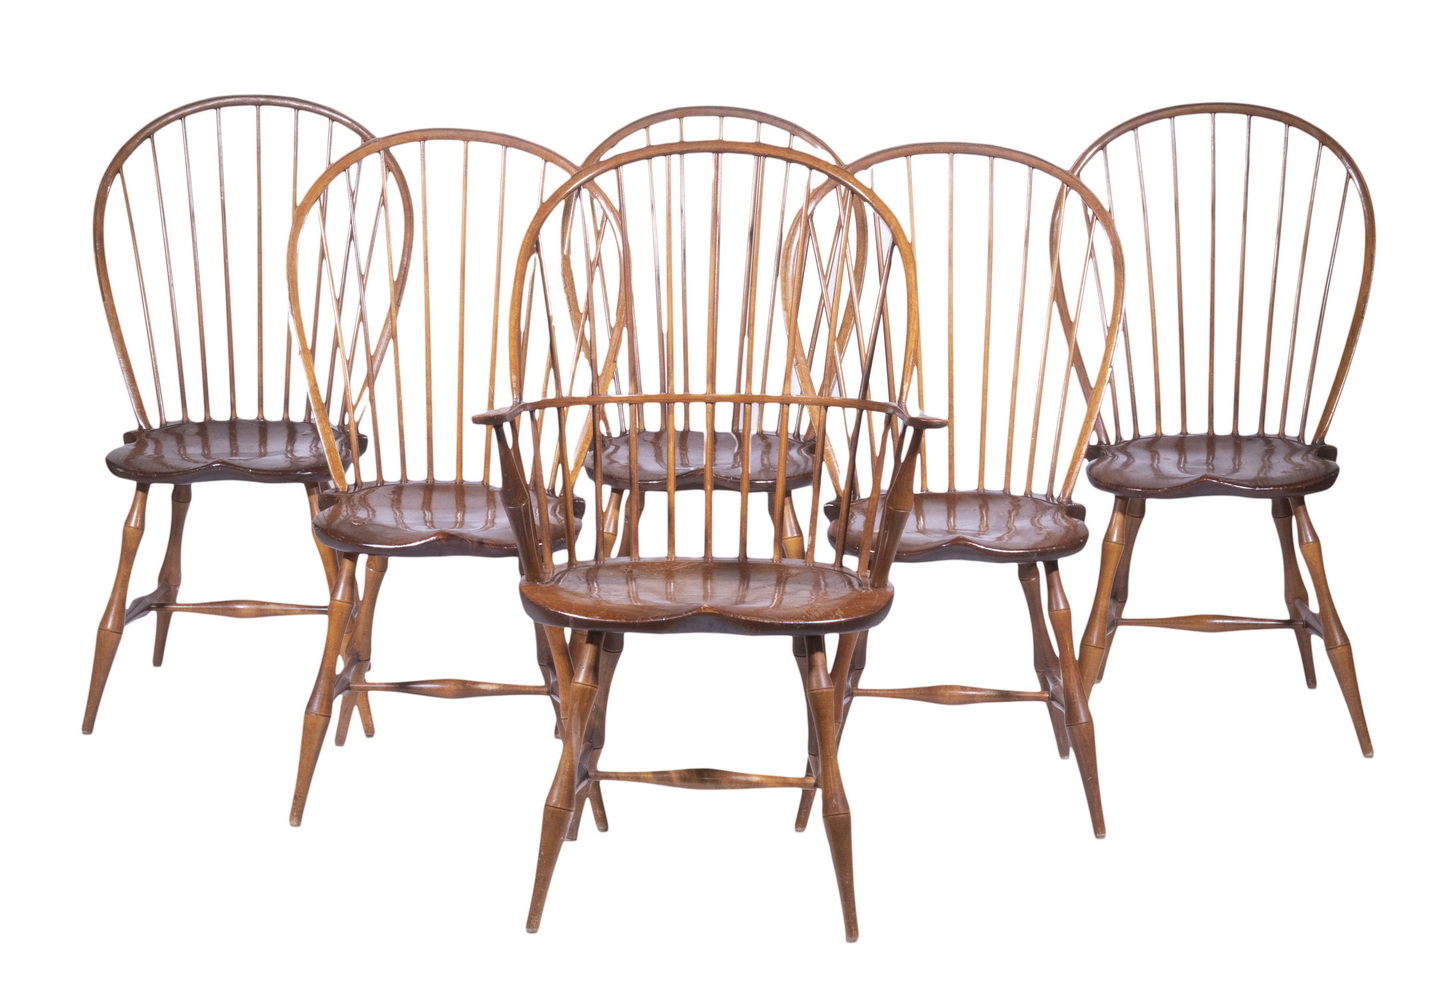 SET OF 6 D R DIMES WINDSOR CHAIRS 302c3a